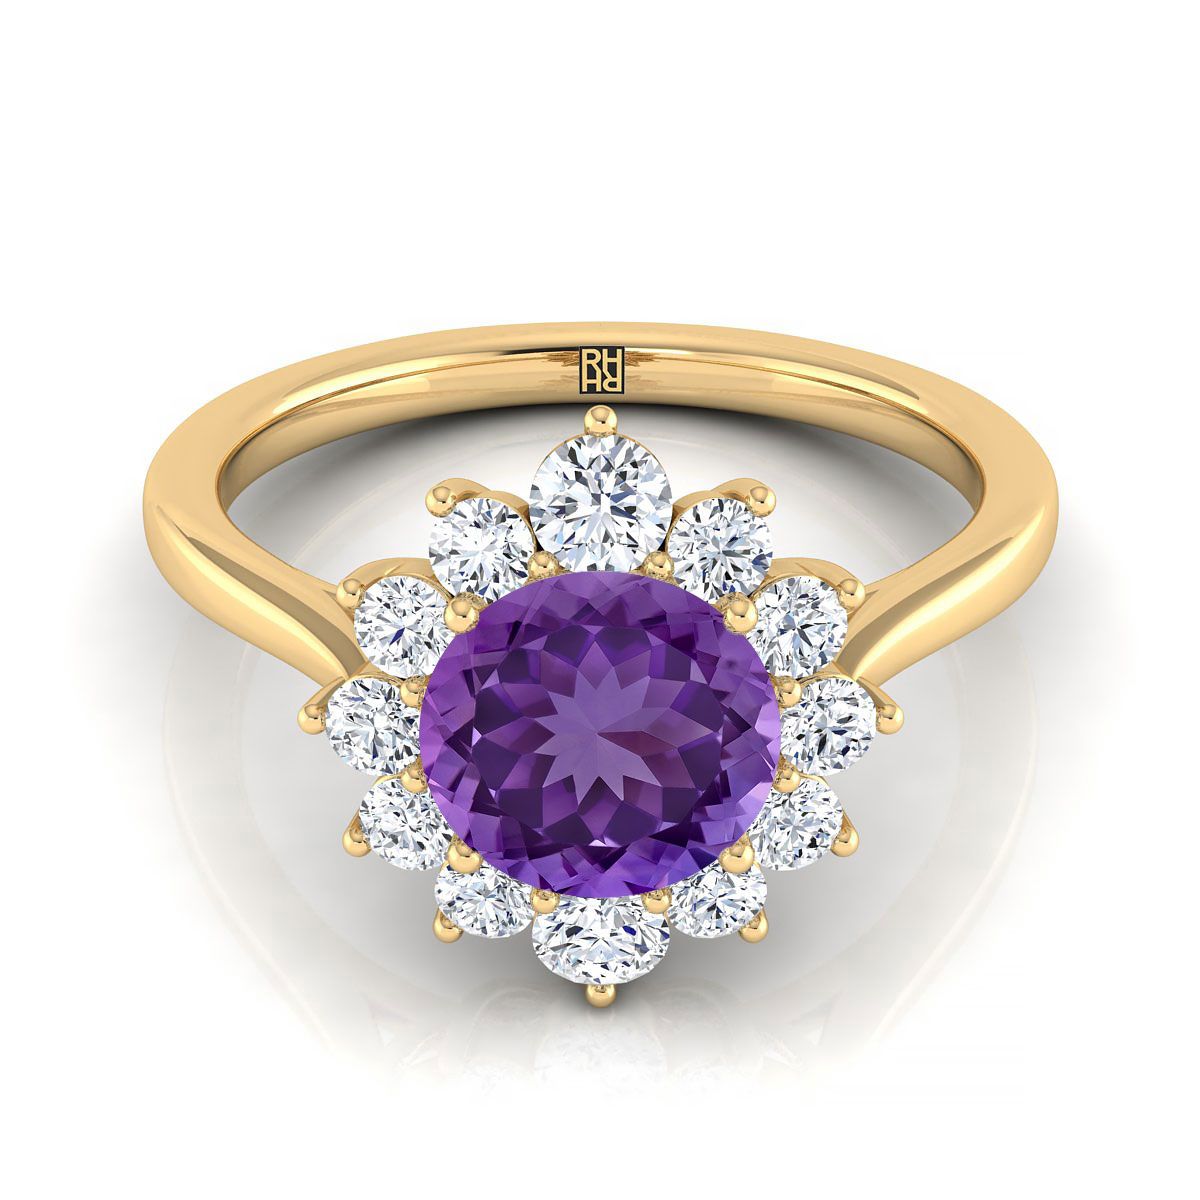 14K Yellow Gold Round Brilliant Amethyst Floral Diamond Halo Engagement Ring -1/2ctw